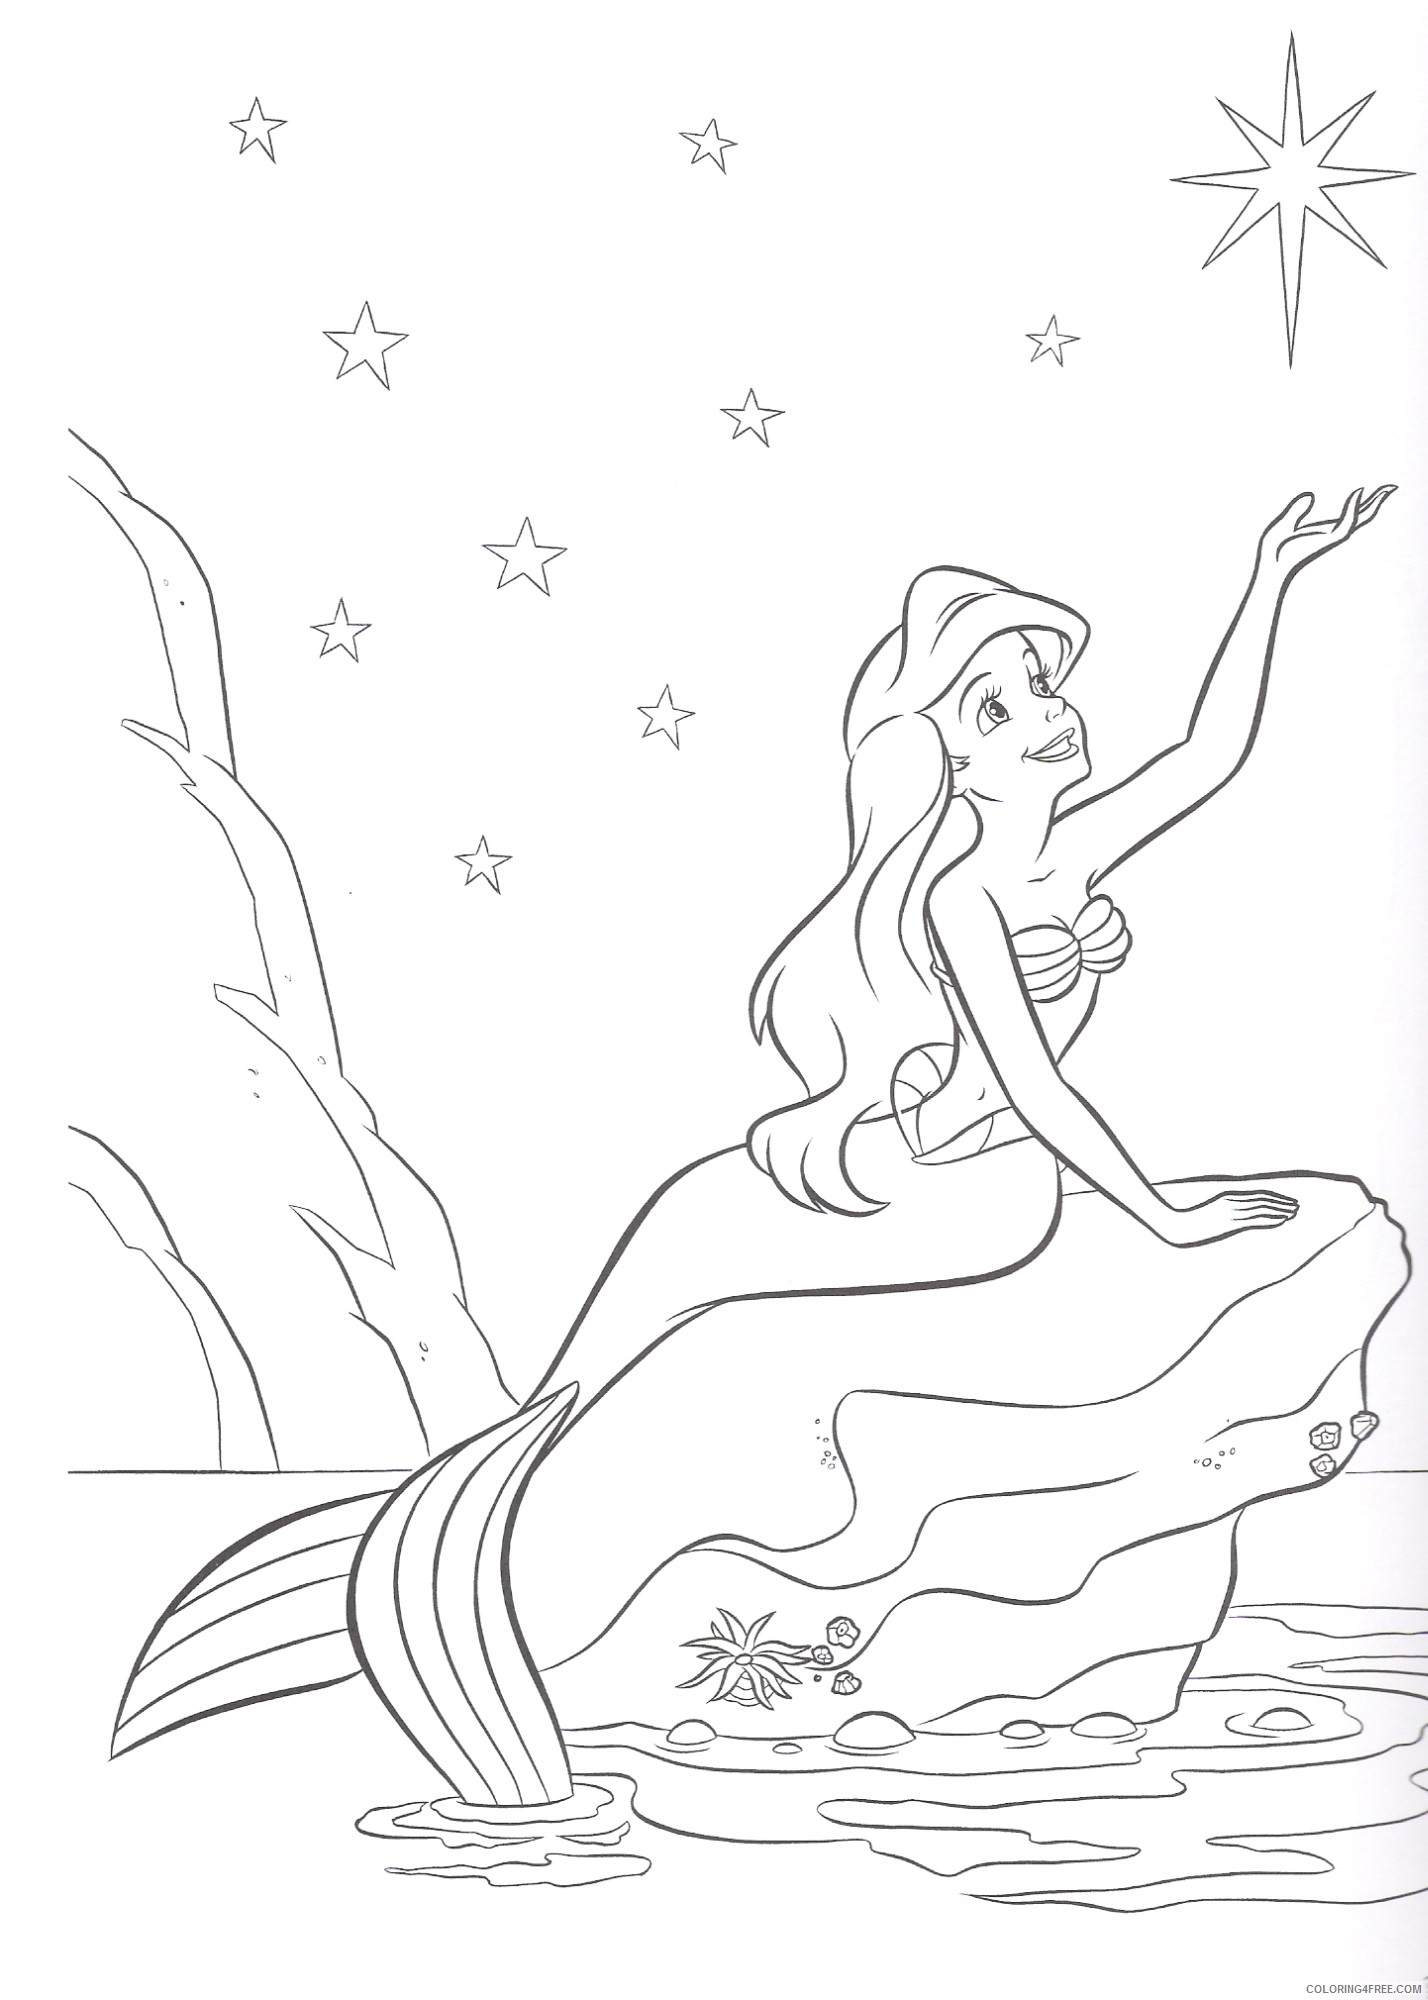 mermaid coloring pages at night Coloring4free